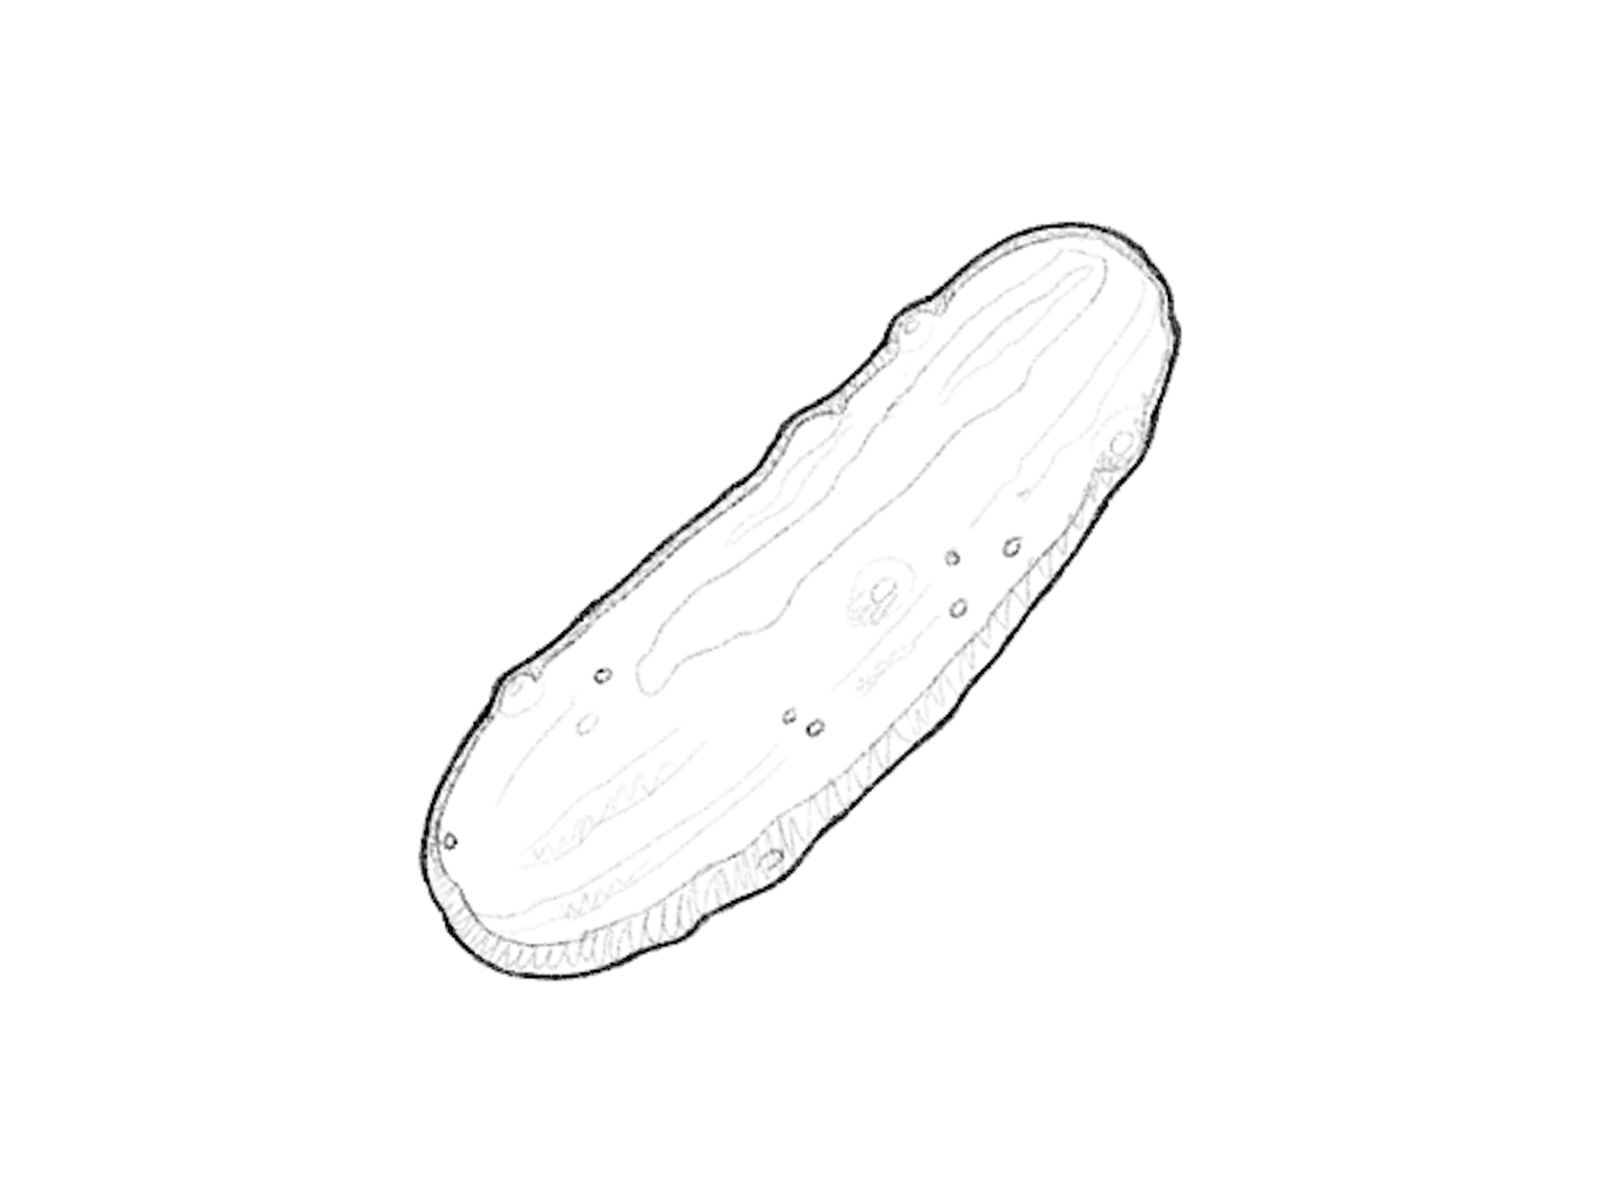 How to draw cucumber step by stepeasy cucumber drawingvegetable drawing   YouTube